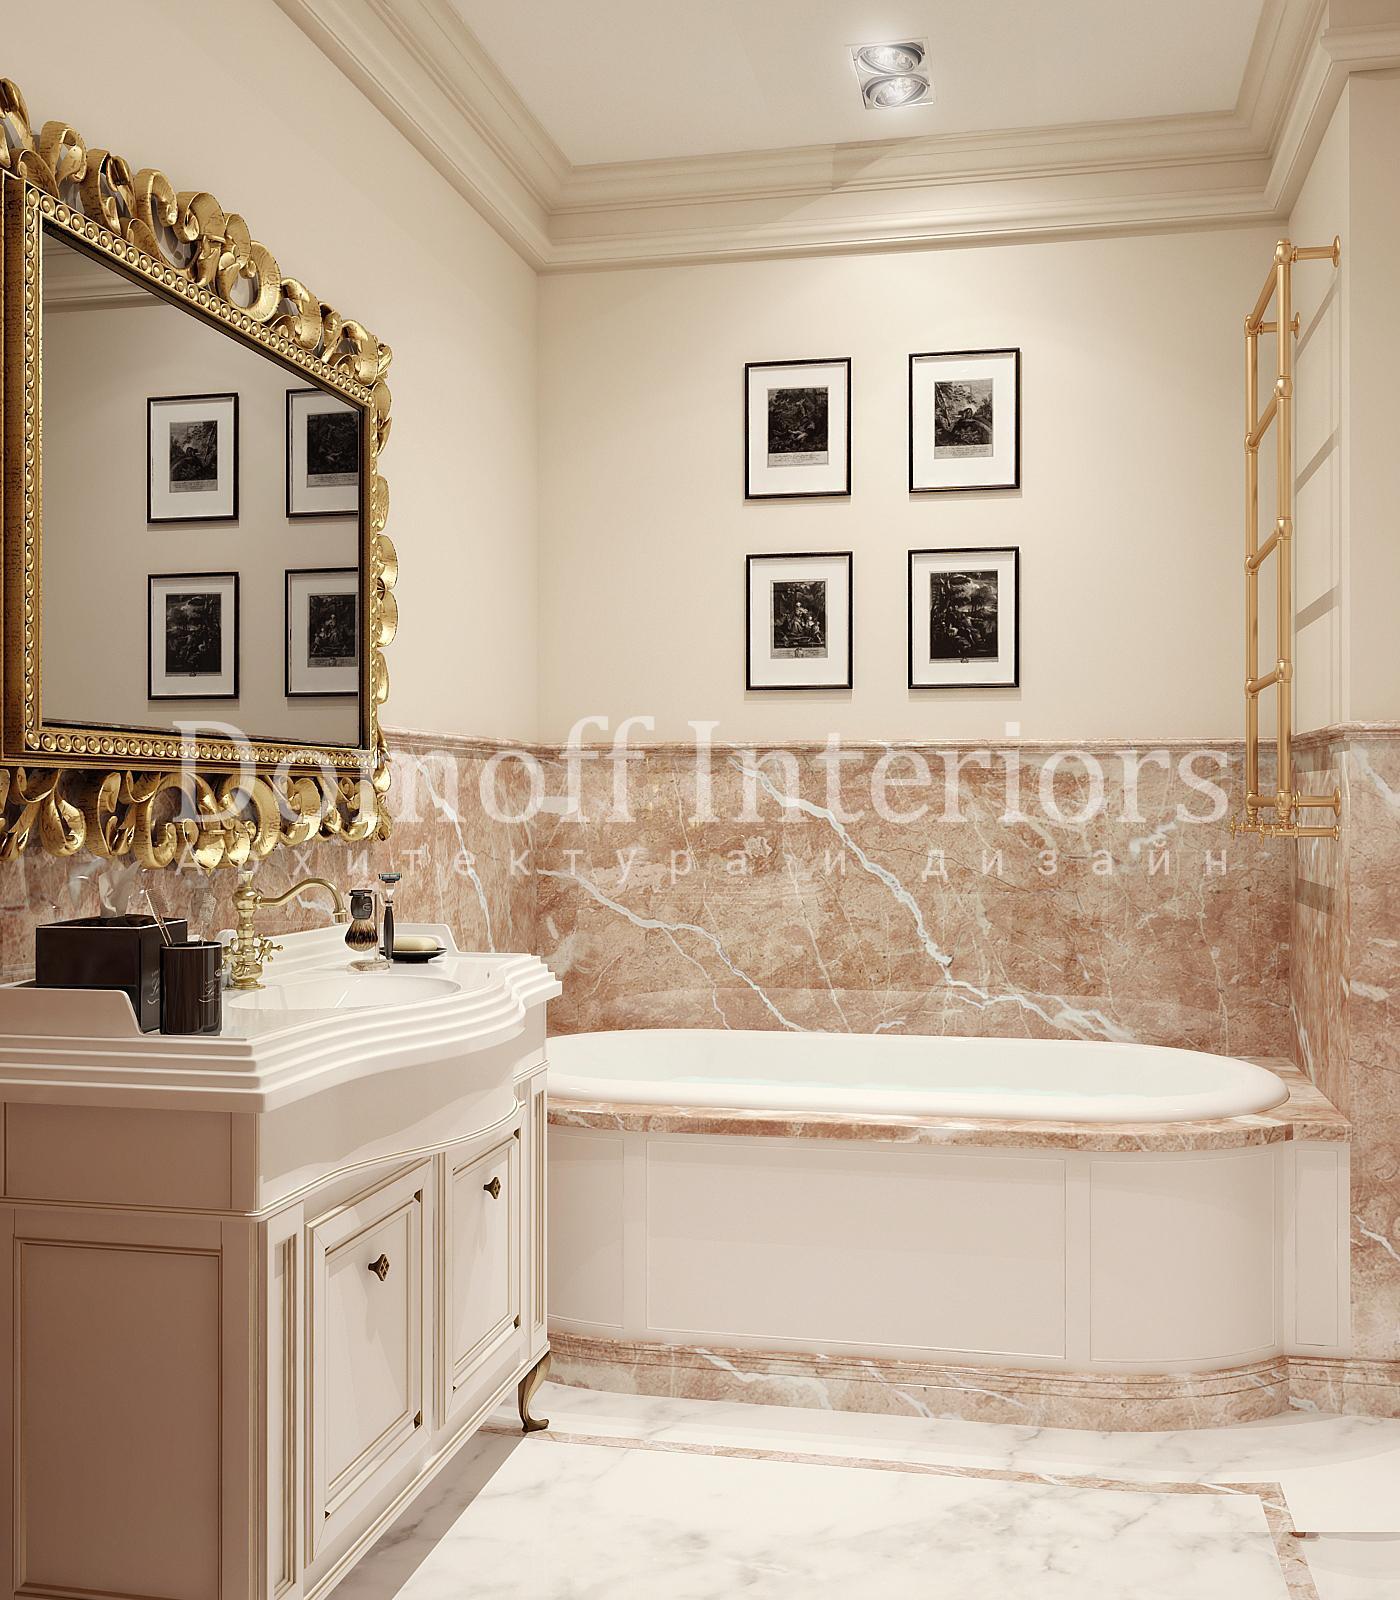 Bathroom made in the style of Contemporary classics